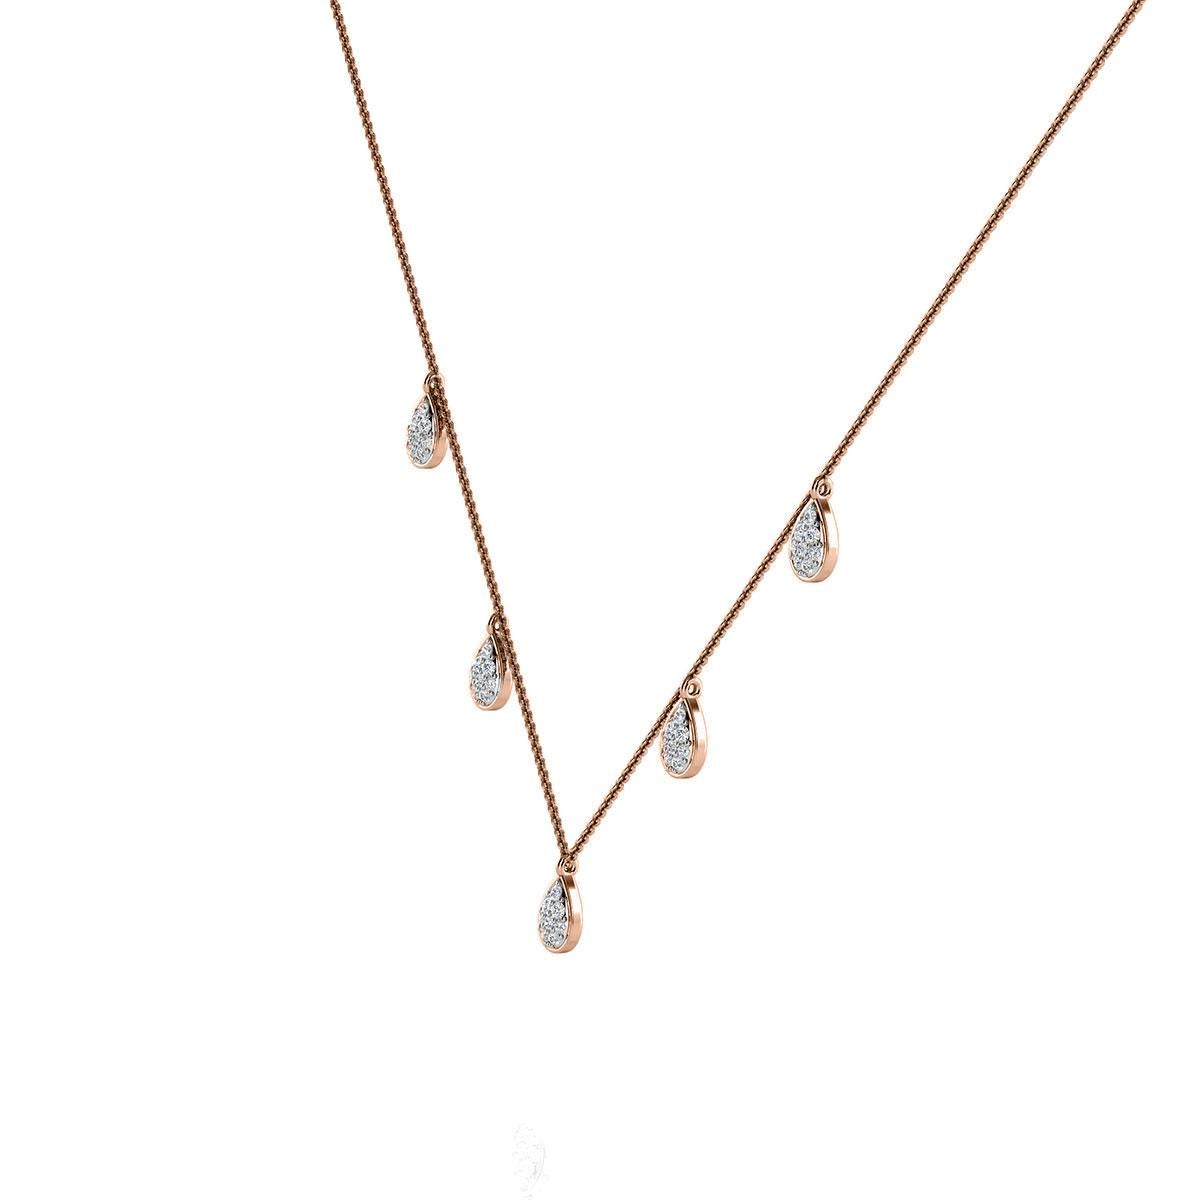 This elegant and delicate necklace features round brilliant diamonds micro-prong set in five (5) pear-shaped plates. Experience the difference!

Product details: 

Center Gemstone Type: NATURAL DIAMOND
Center Gemstone Color: WHITE
Center Gemstone